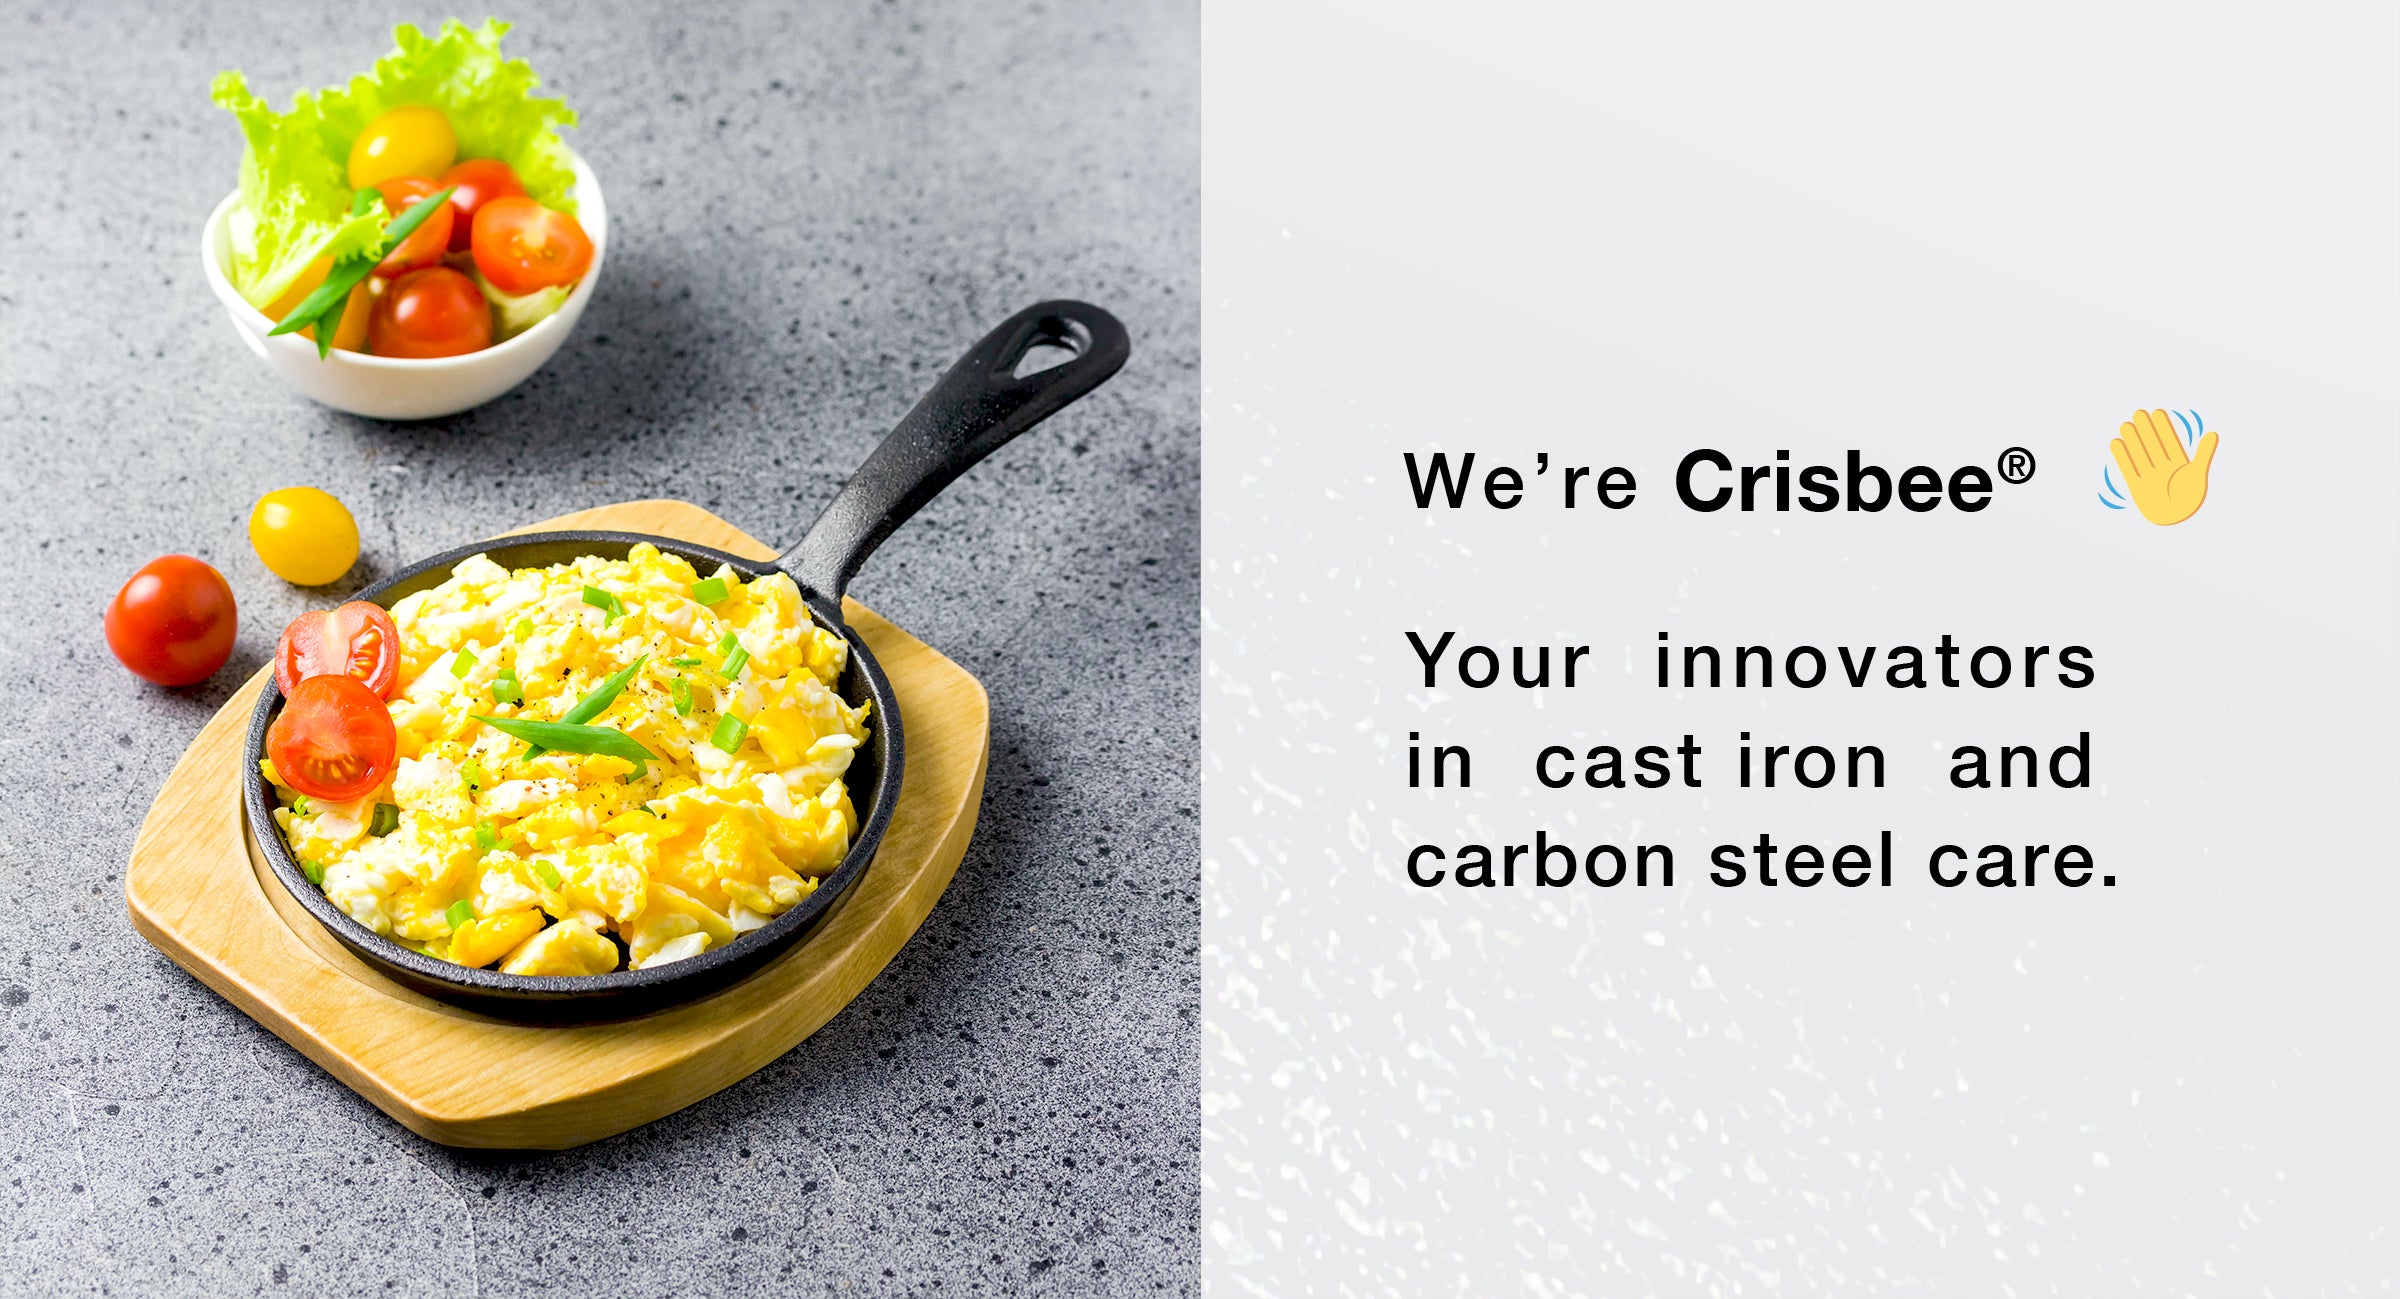  Crisbee Stik® Cast Iron and Carbon Steel Seasoning - Family  Made in USA - The Cast Iron Seasoning Oil & Conditioner Preferred by  Experts - Maintain a Cleaner Non-Stick Skillet: Home